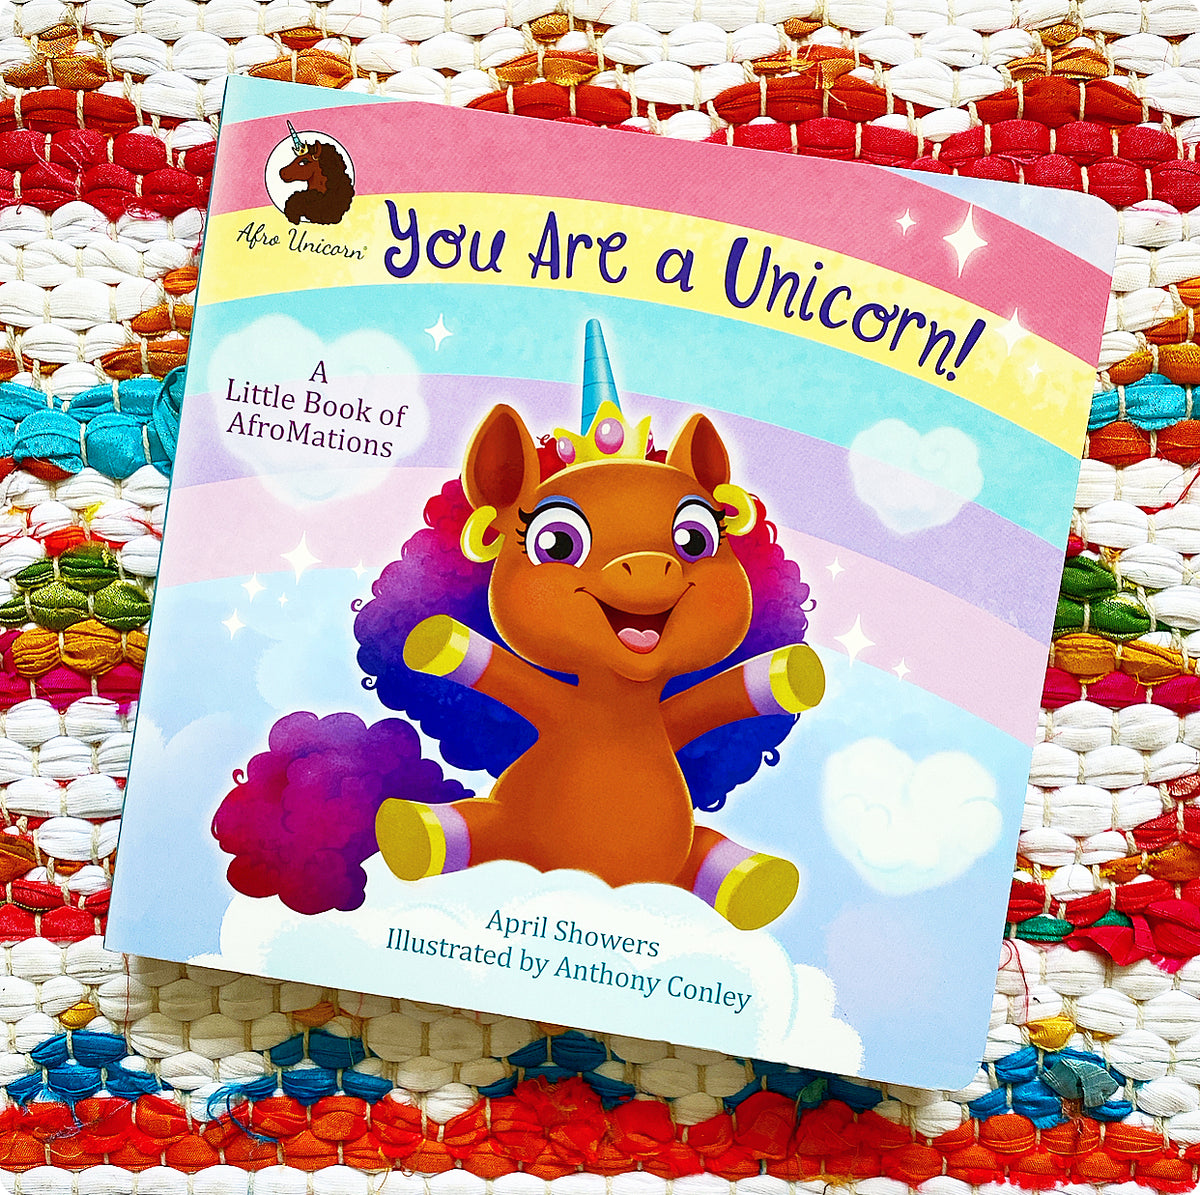 You Are a Unicorn!: A Little Book of Afromations